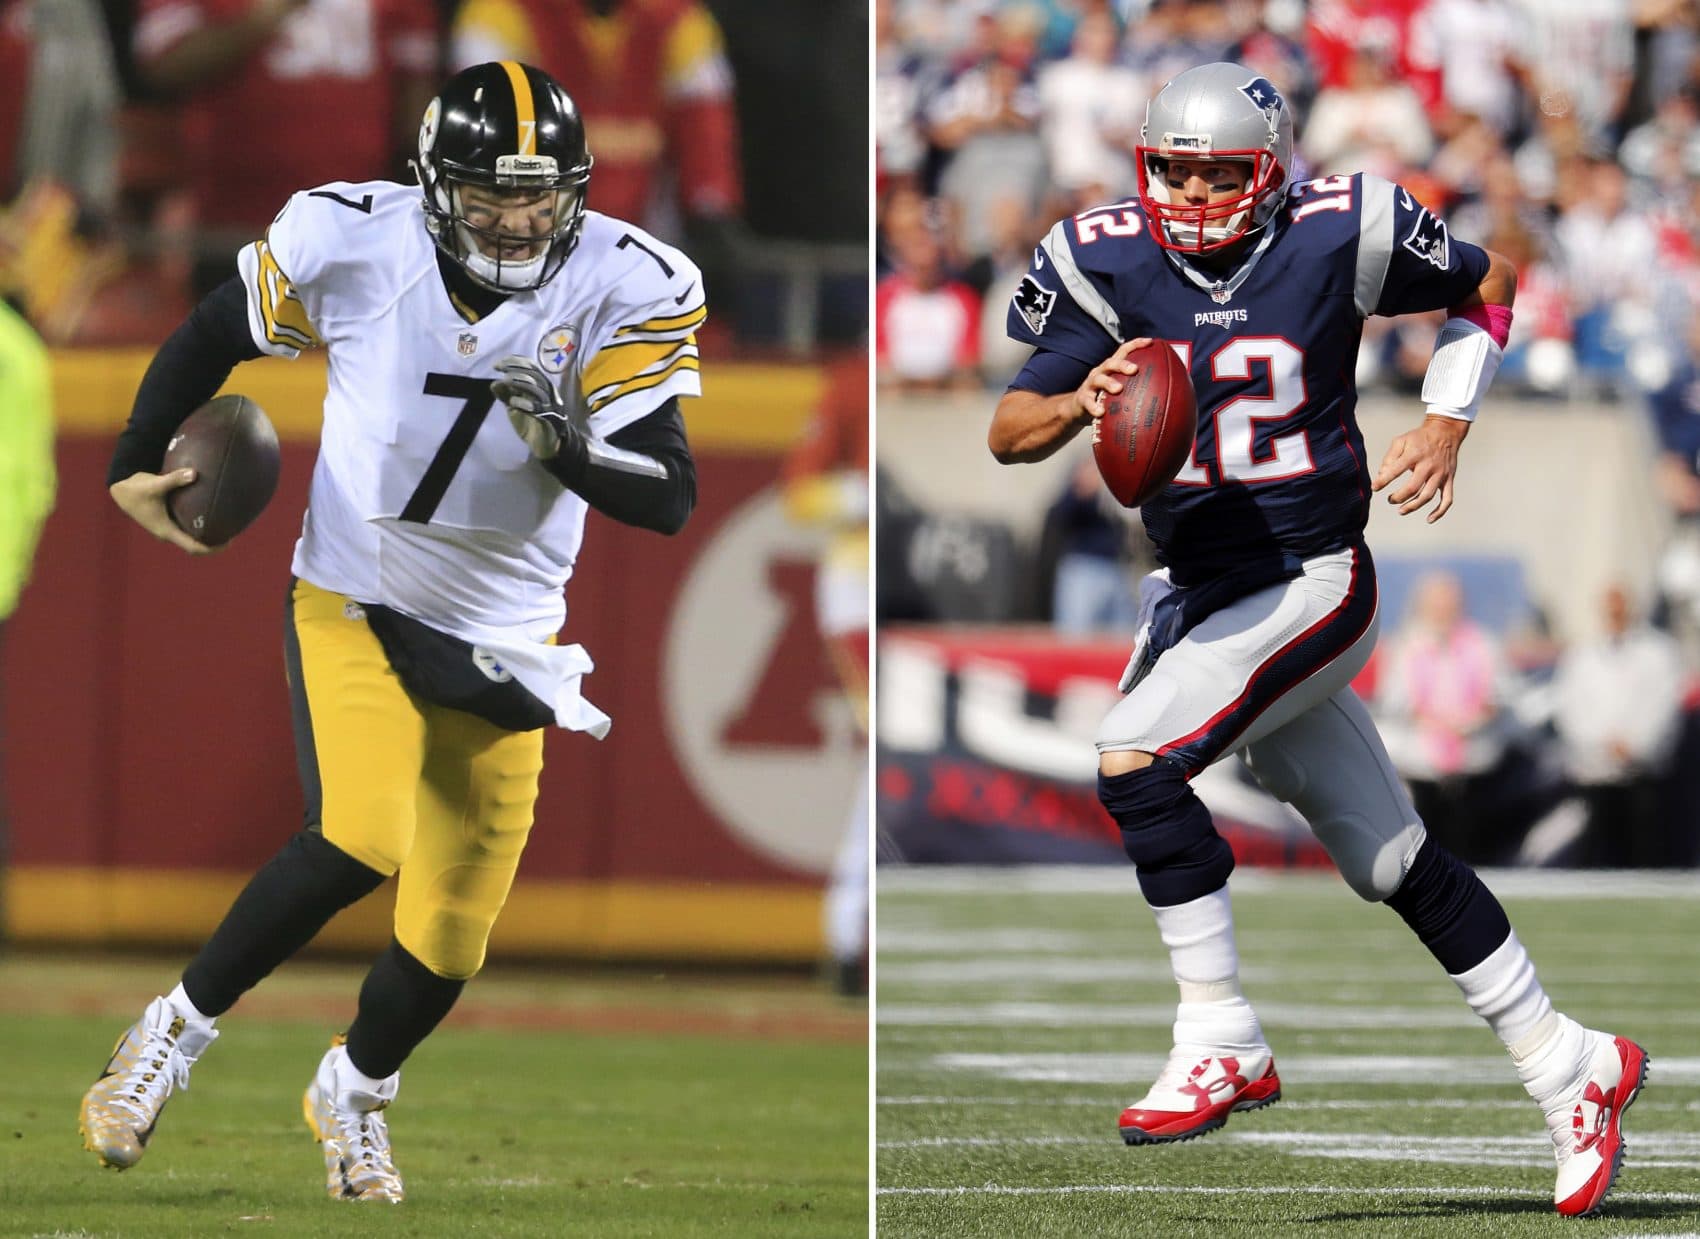 At left, in a Jan. 15, 2017 file photo, Pittsburgh Steelers quarterback Ben Roethlisberger plays against the Kansas City Chiefs. At right, in an Oct. 16, 2016 file photo, New England Patriots quarterback Tom Brady runs against the Cincinnati Bengals (Winslow Townson/AP File)